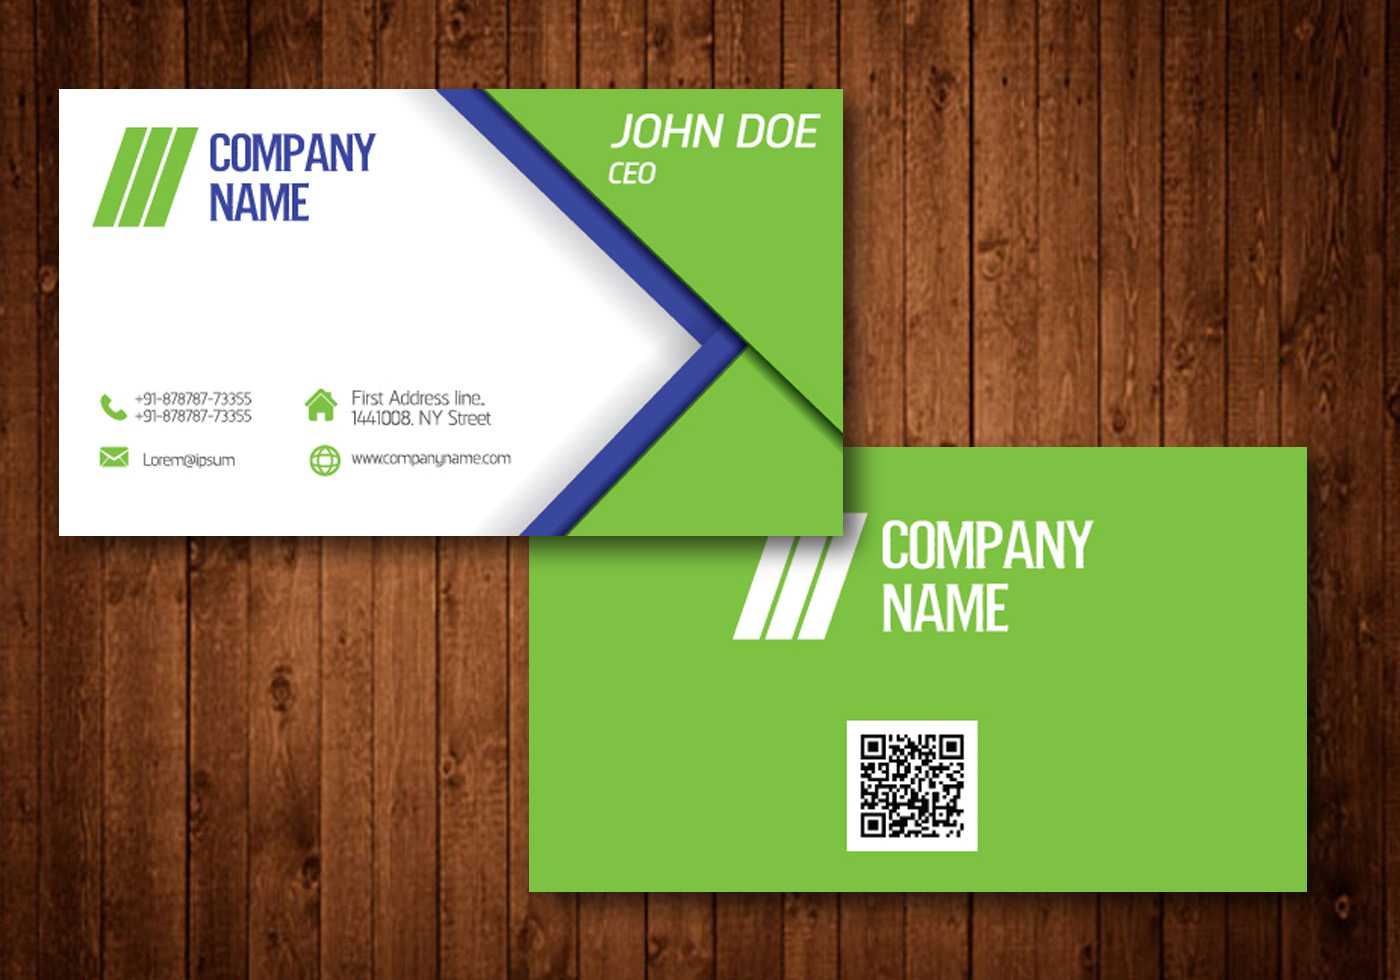 Business Card Free Vector Art – (109,616 Free Downloads) With Regard To Templates For Visiting Cards Free Downloads